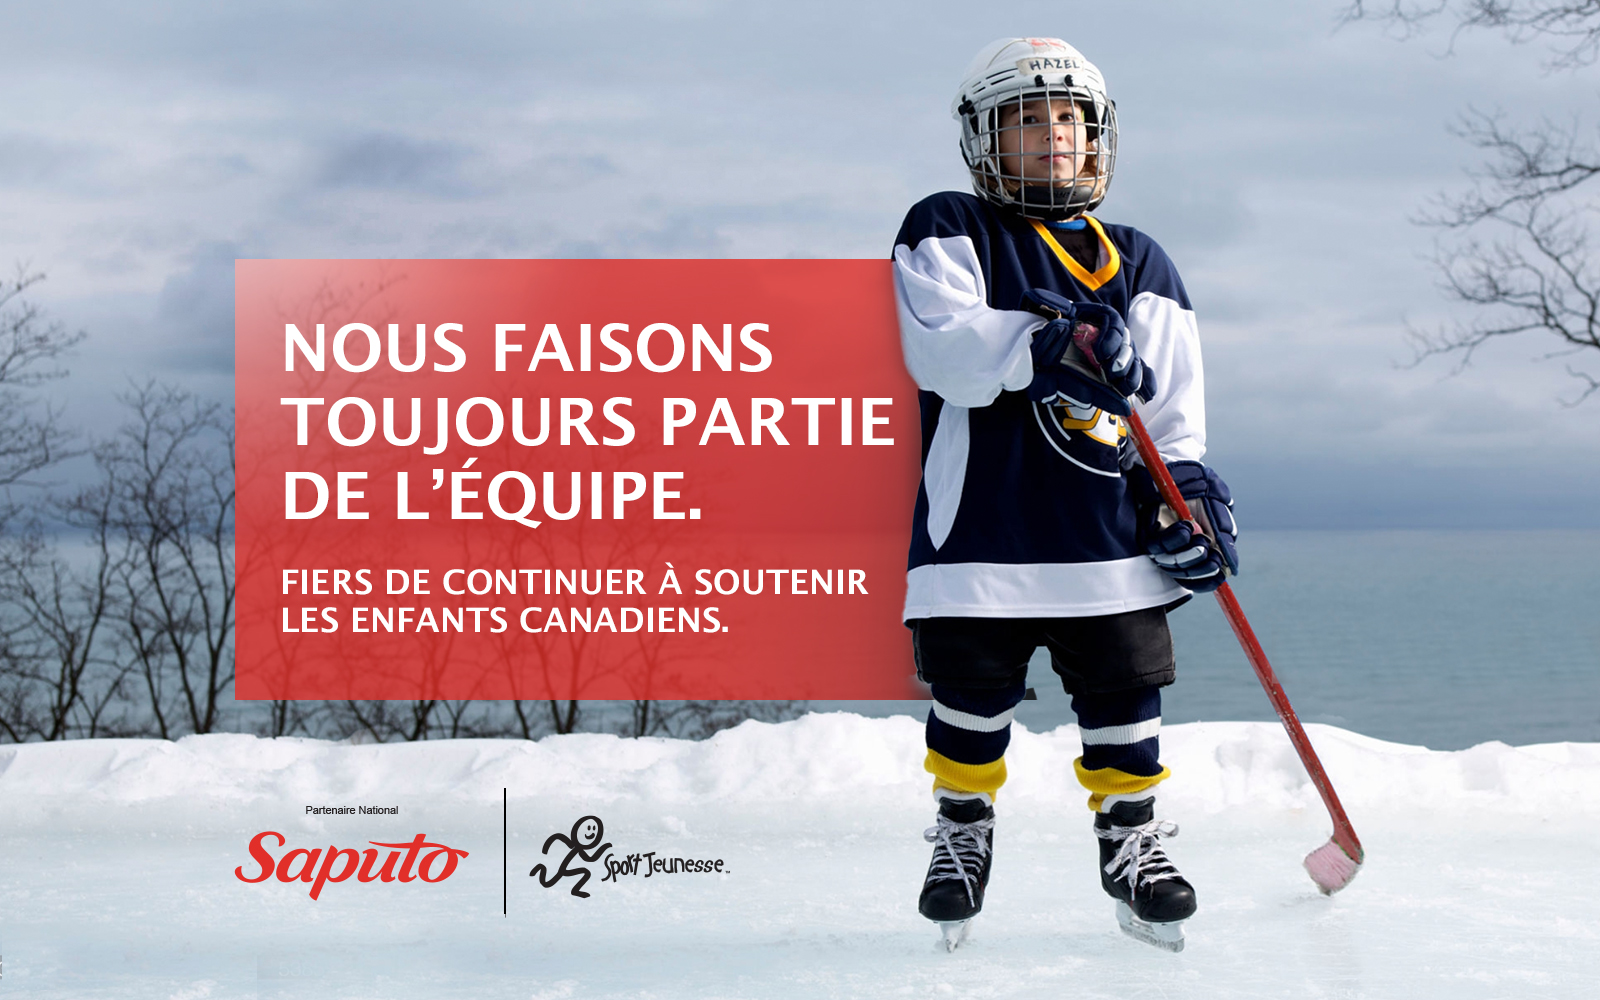 We're still on the team. Saputo is proud to continue helping Canadian kids play.